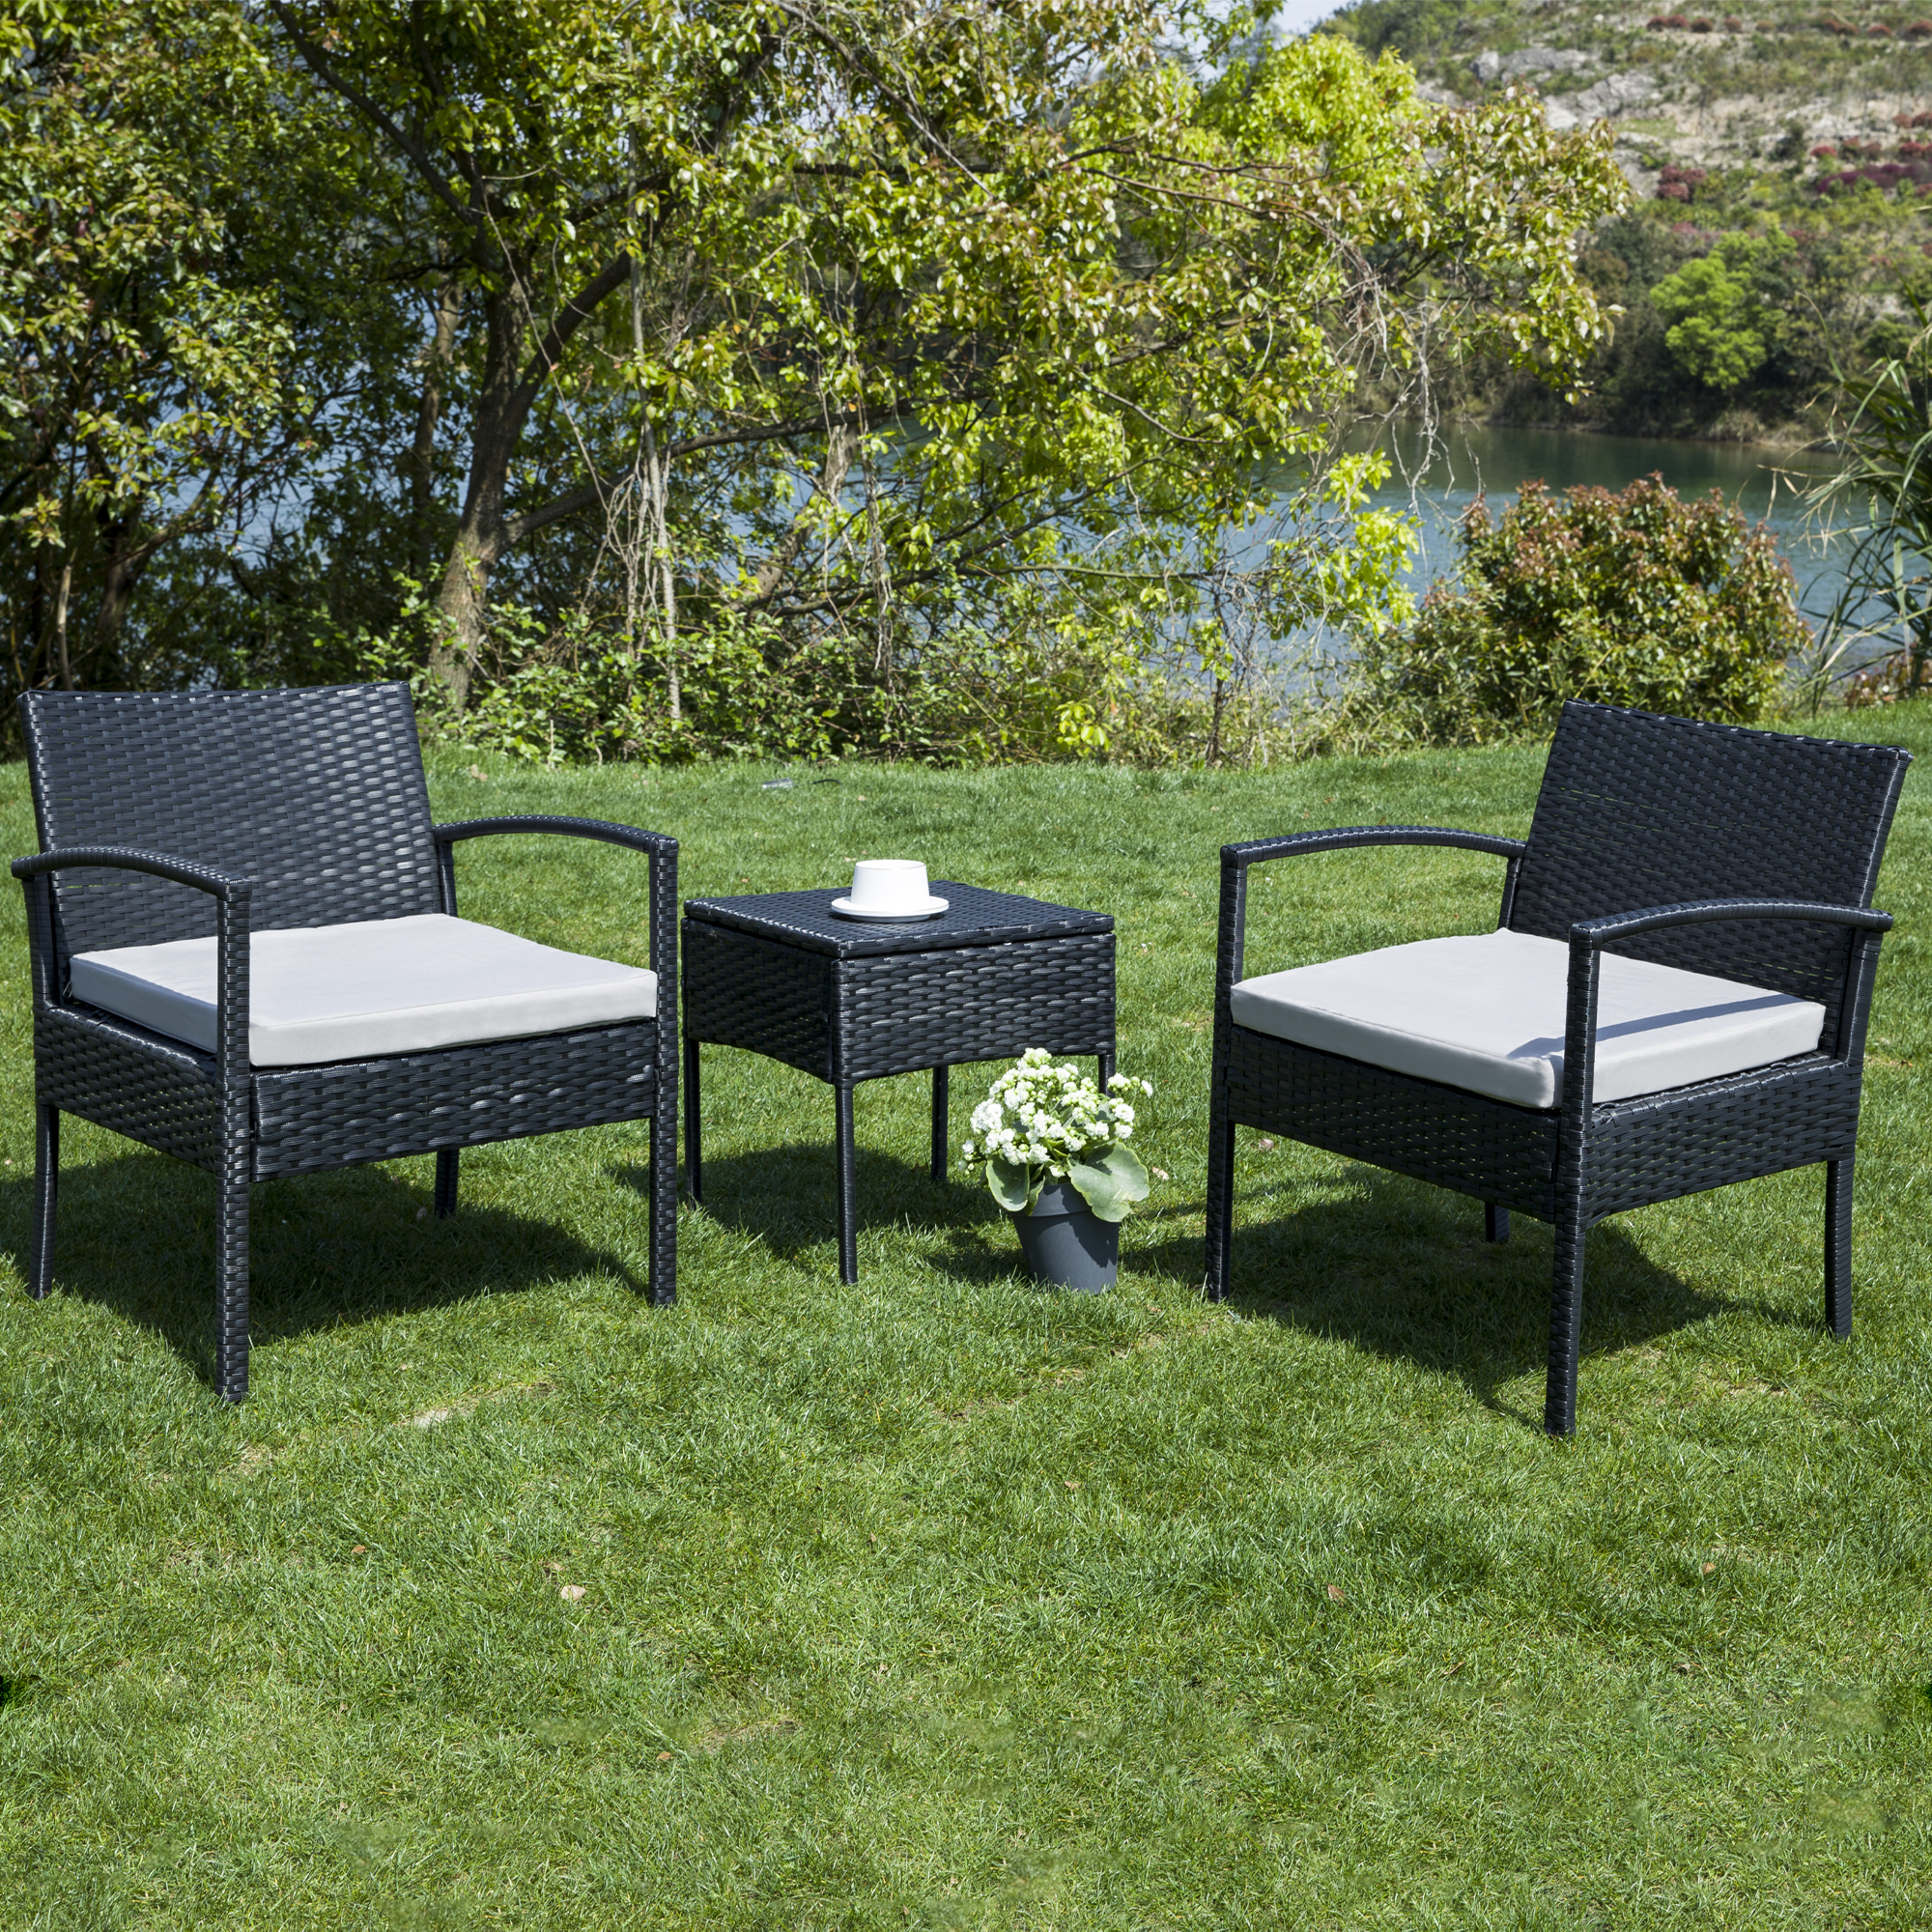 FHFO Patio Furniture Set Outdoor Furniture Outdoor Patio Furniture Set 3 Pieces Patio Conversation Set Table and Chairs with Cushions for Garden Balcony Backyard Porch Lawn Black Rattan Grey Cushion - image 3 of 5